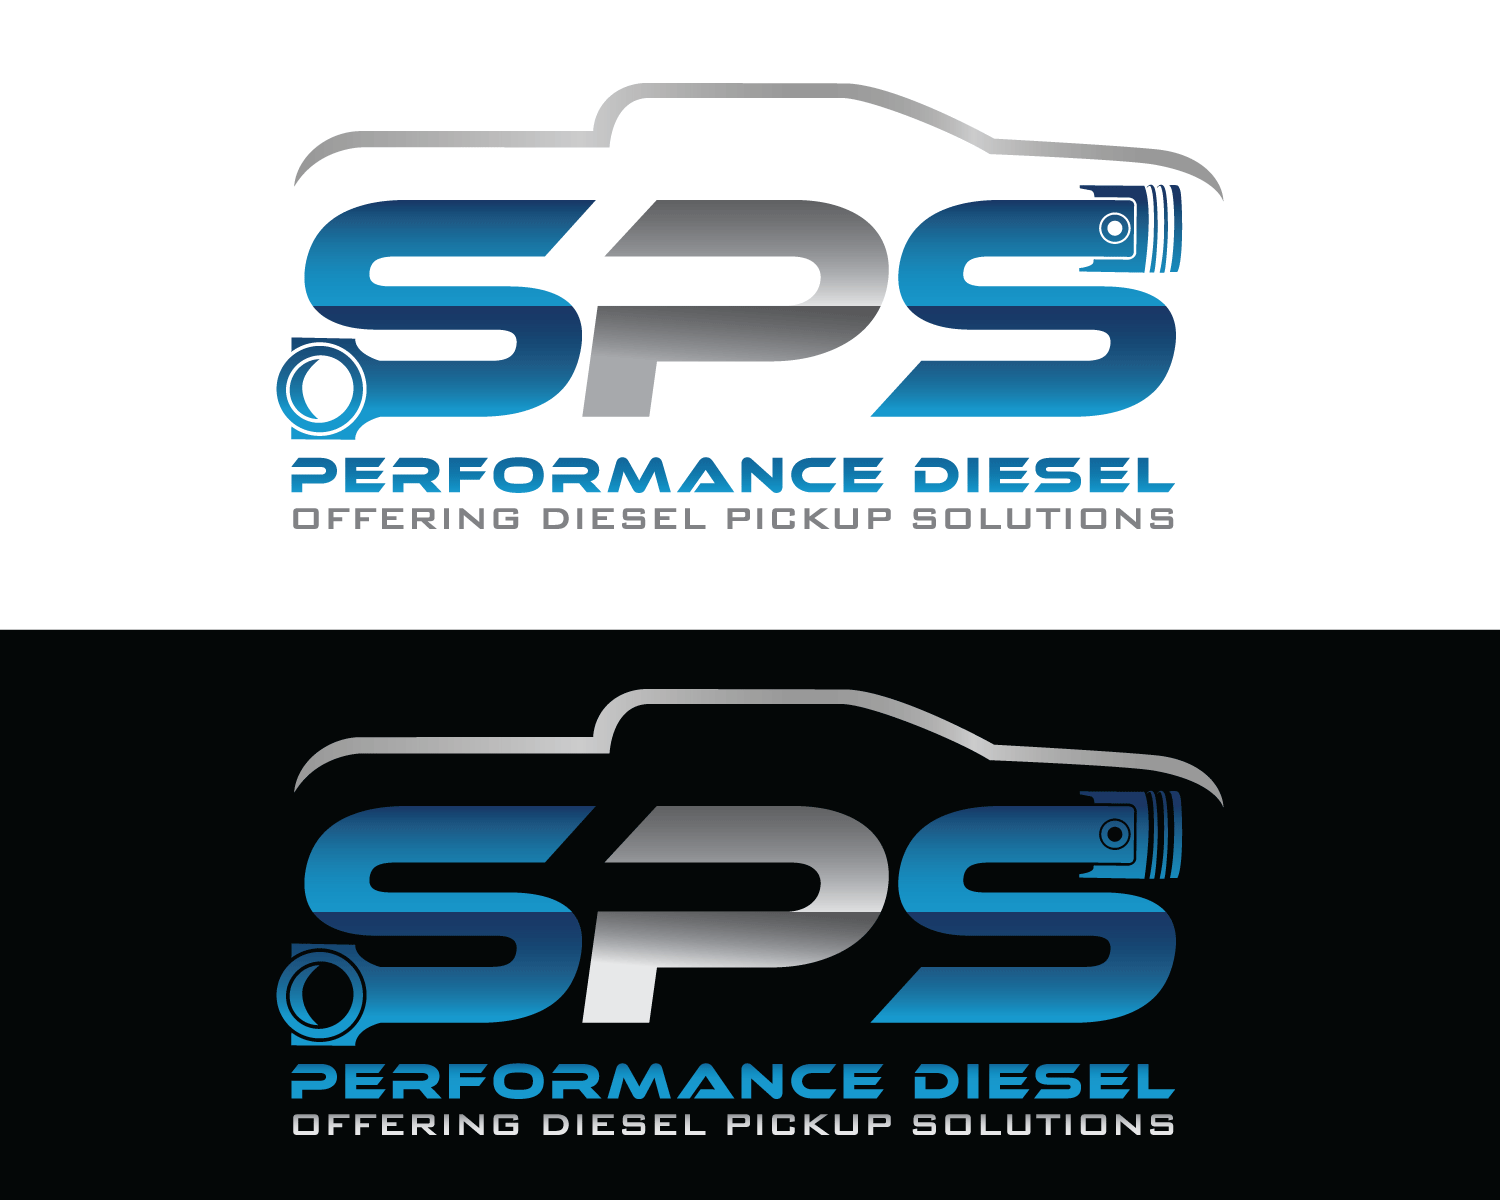 SPS Utility a div of Strategic Parts Sourcing, Inc. | T&D World